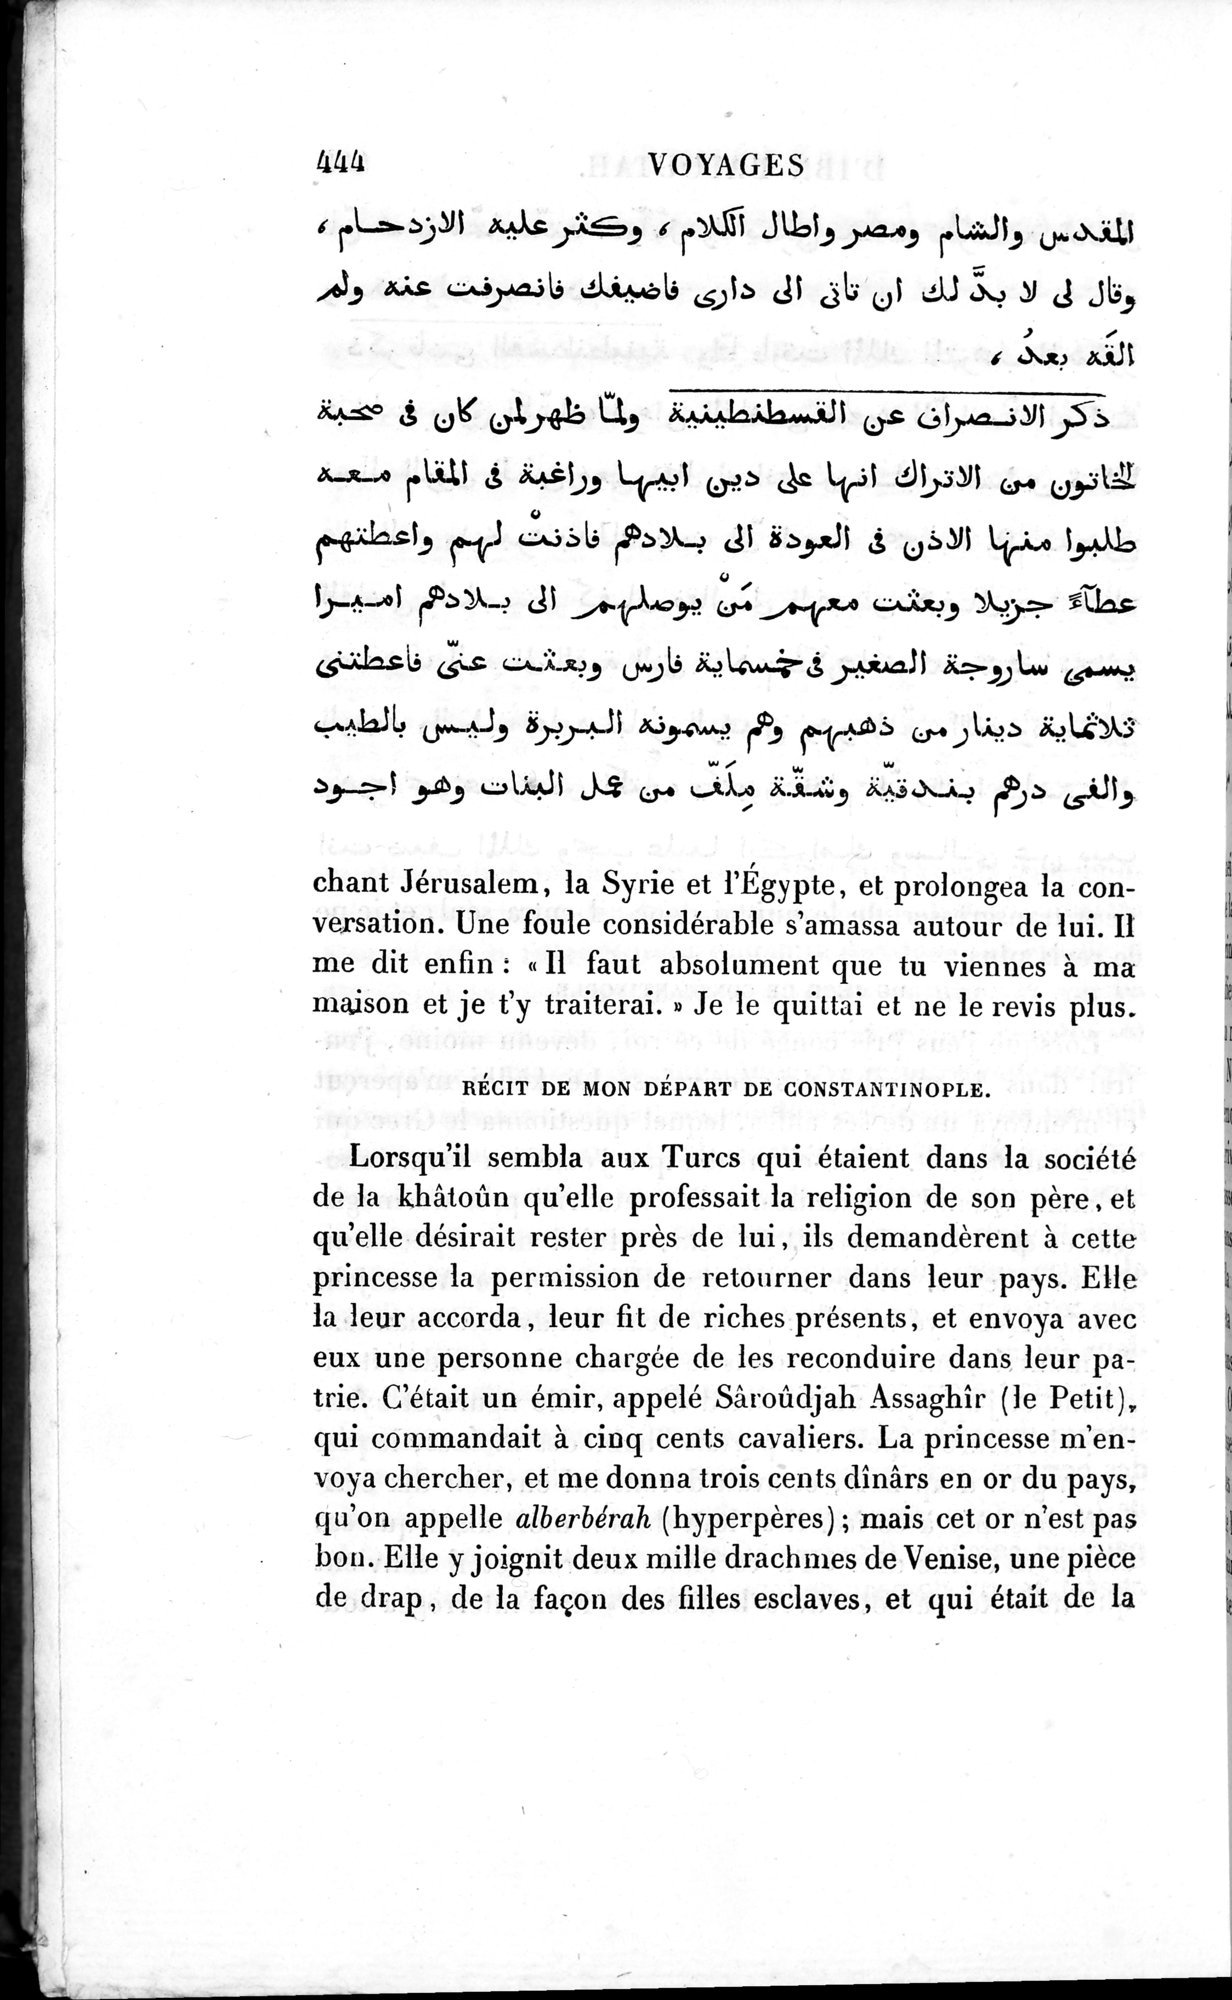 Voyages d'Ibn Batoutah : vol.2 / Page 472 (Grayscale High Resolution Image)